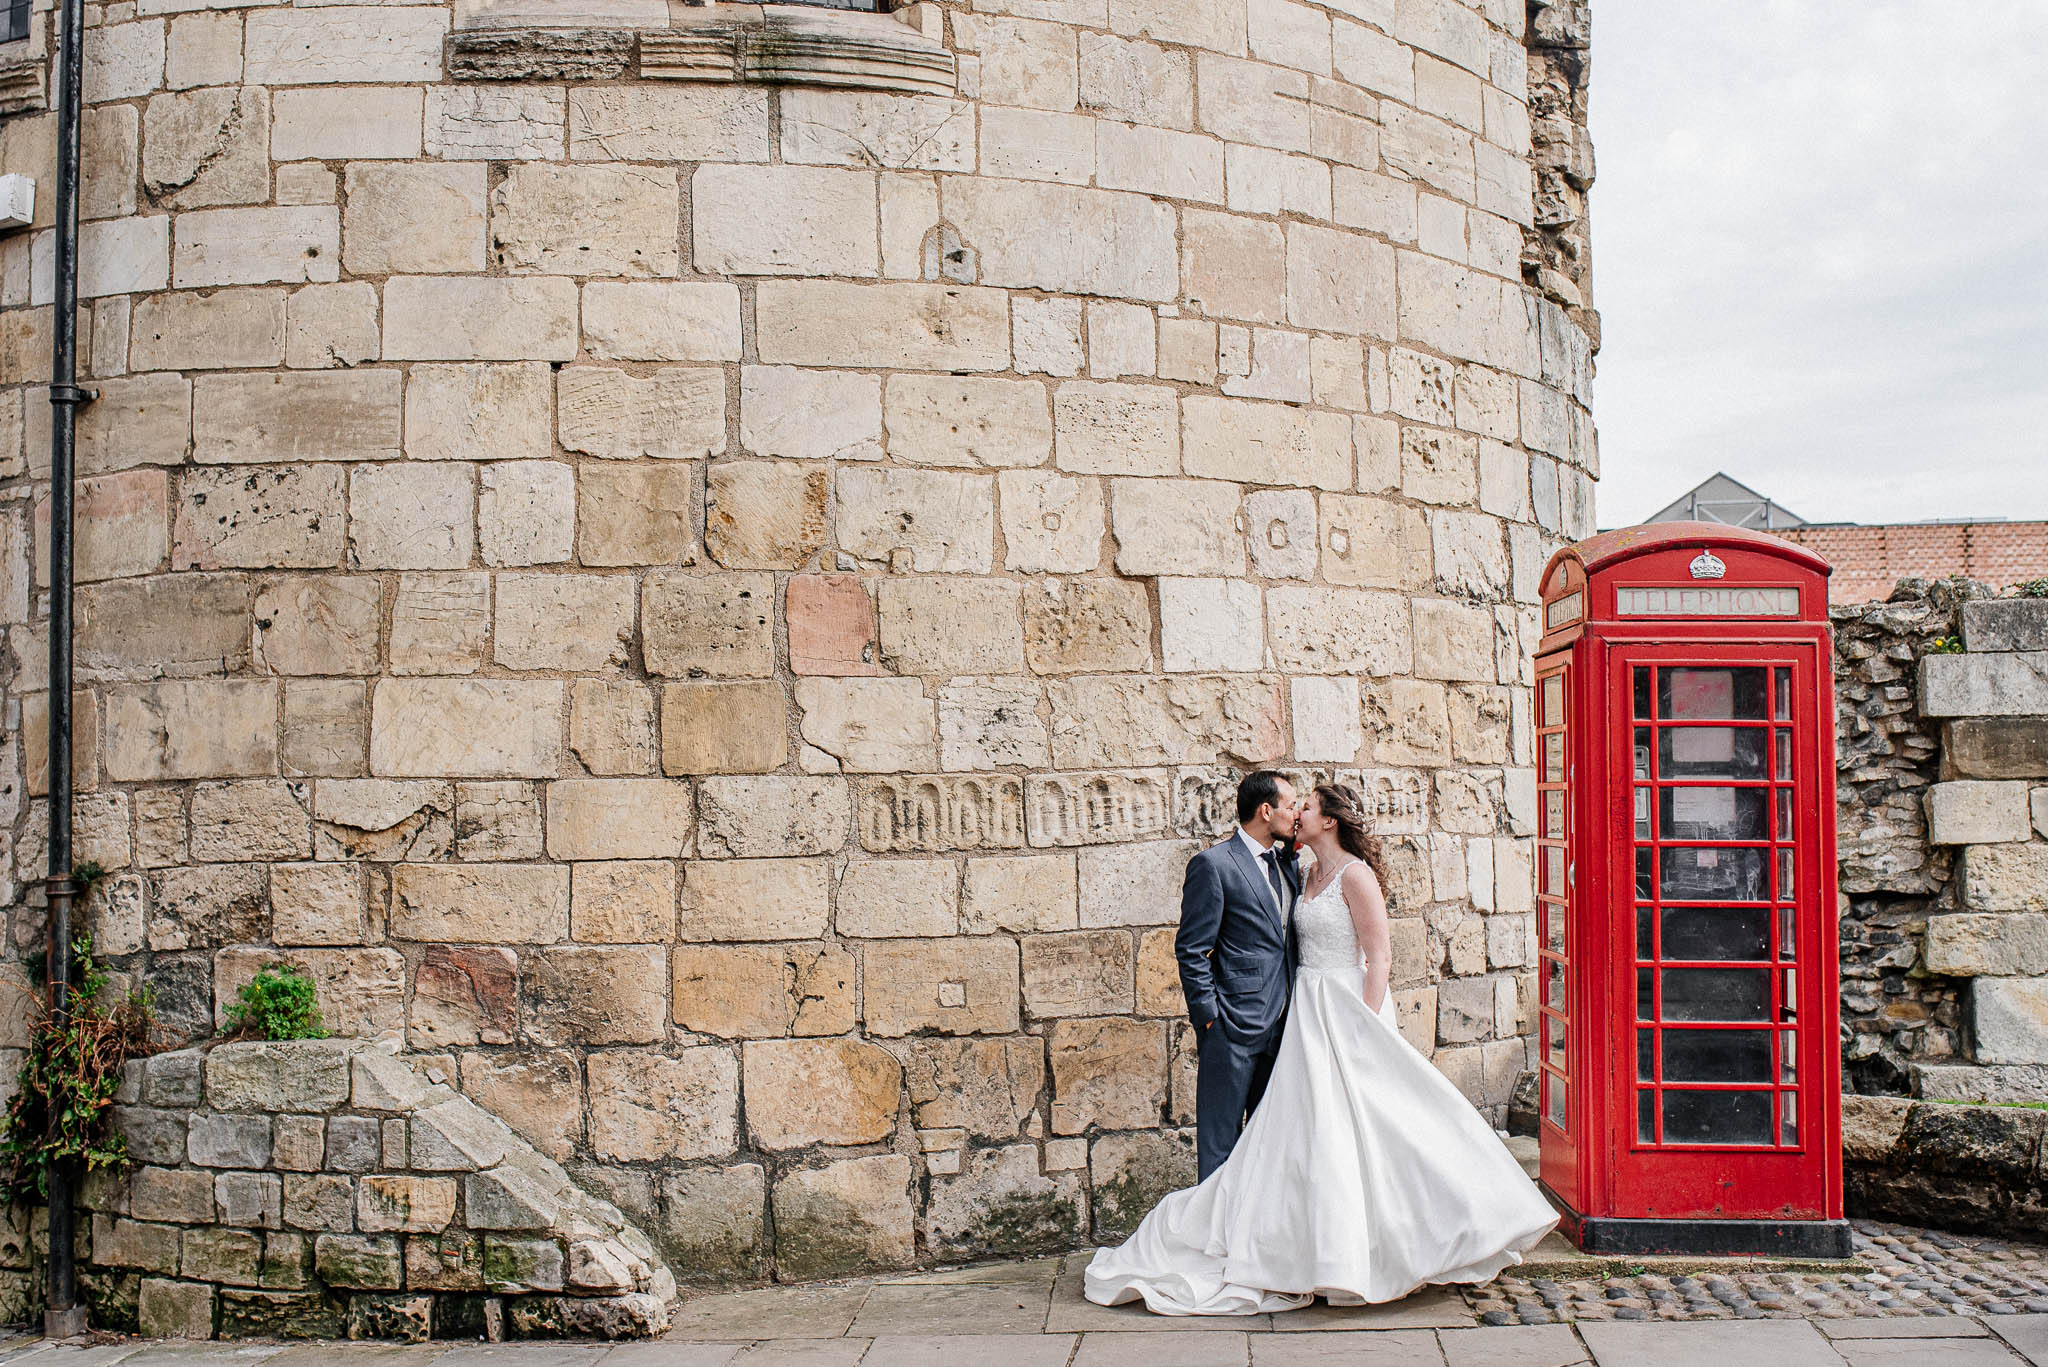 Bride and groom kissing next to a traditional red telephone box.